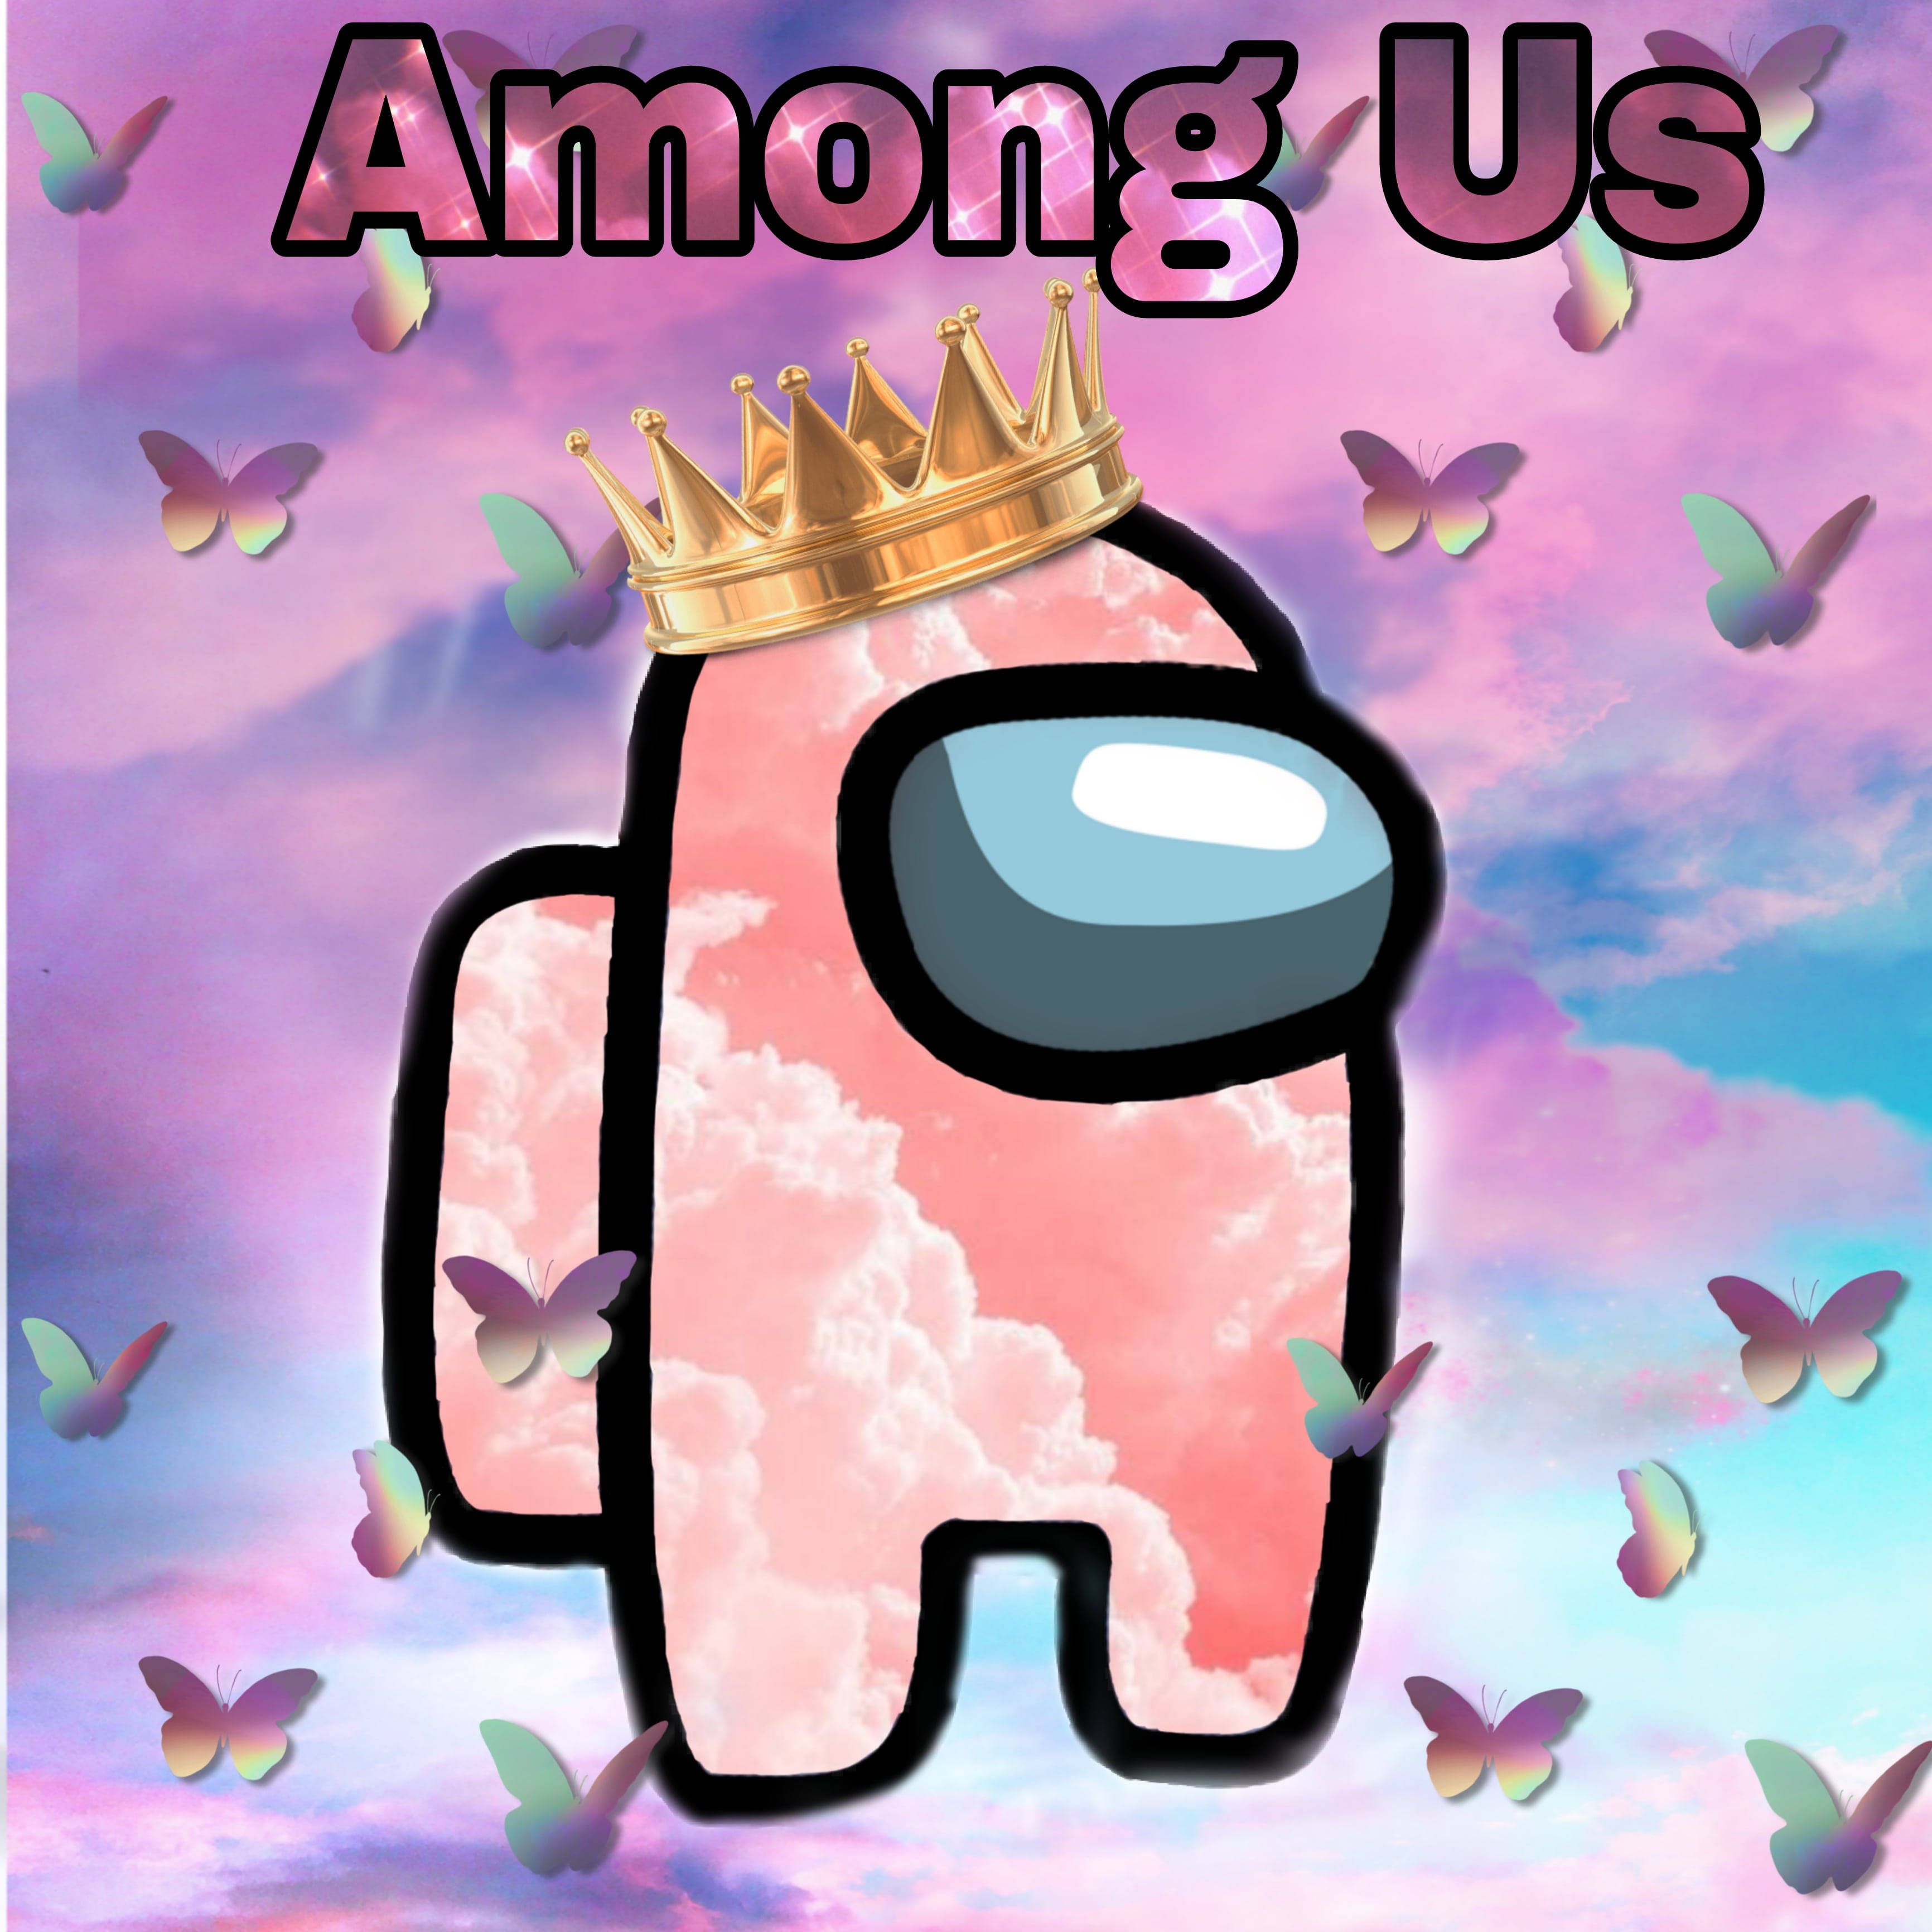 An Among Us character wearing a golden crown and sunglasses, with a pink and blue cloud background and butterflies. - Among Us